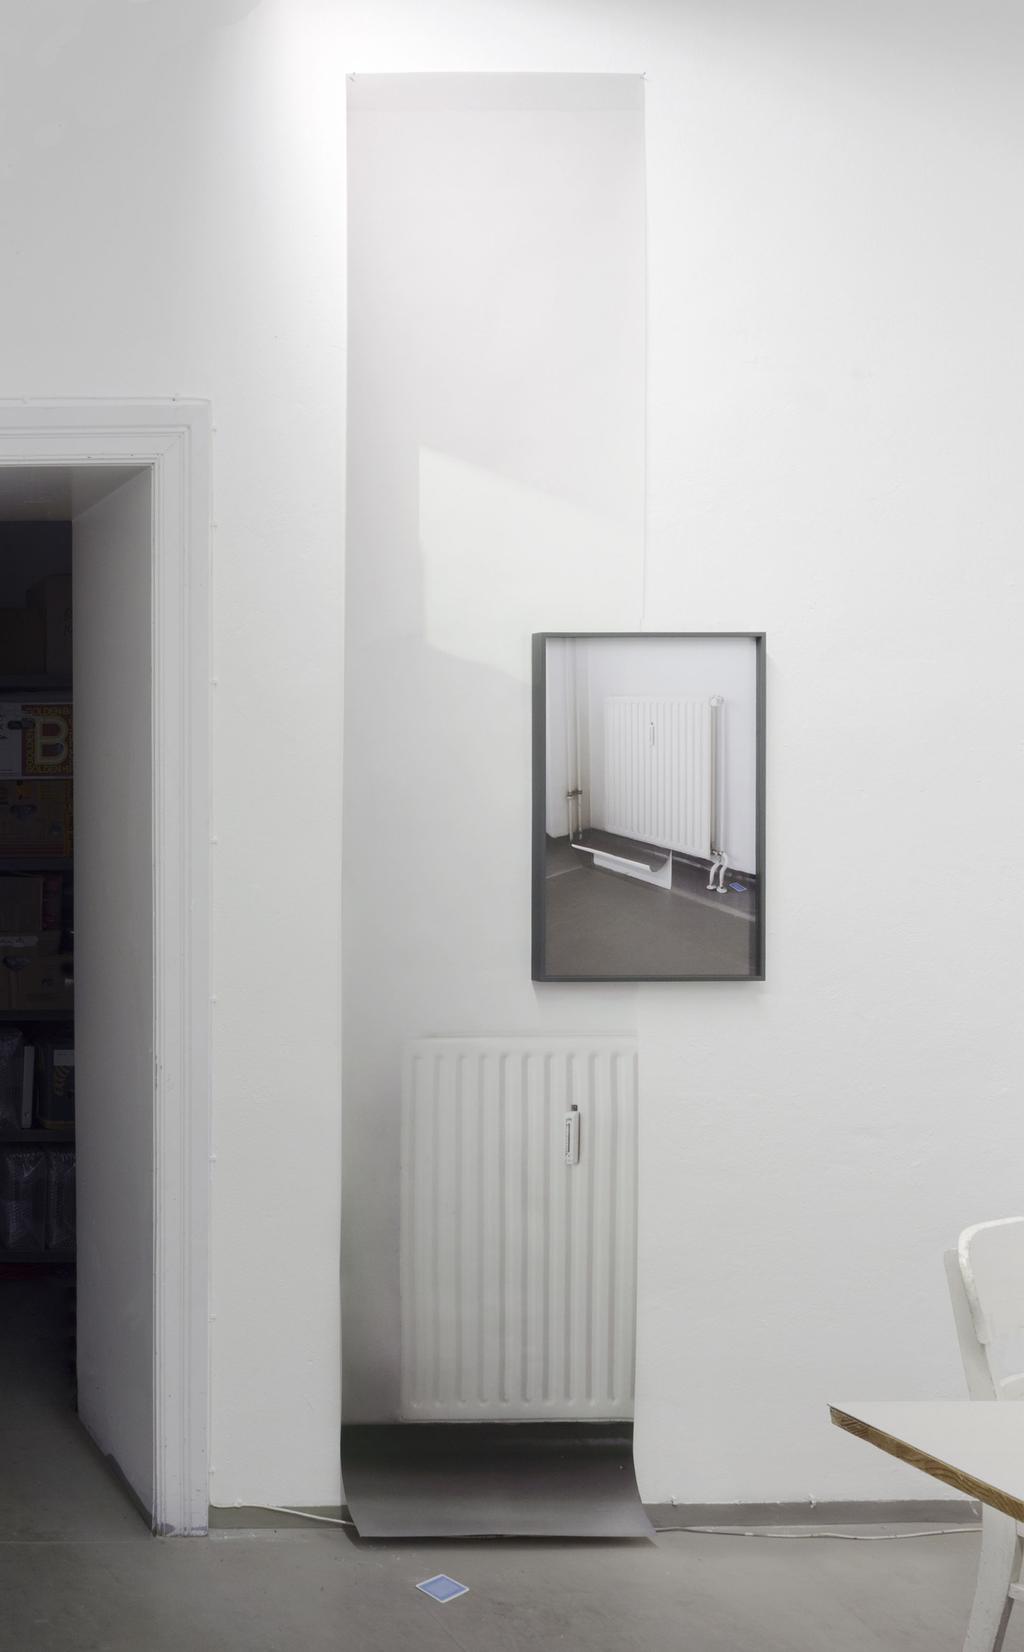 Kathrin Sonntag, END OF QUOTE, 2017. Photograhic wallpaper, 105 x 24 in, ed. 3. Kathrin Sonntag s works similarly respond to the site of their production, but within the literal space.